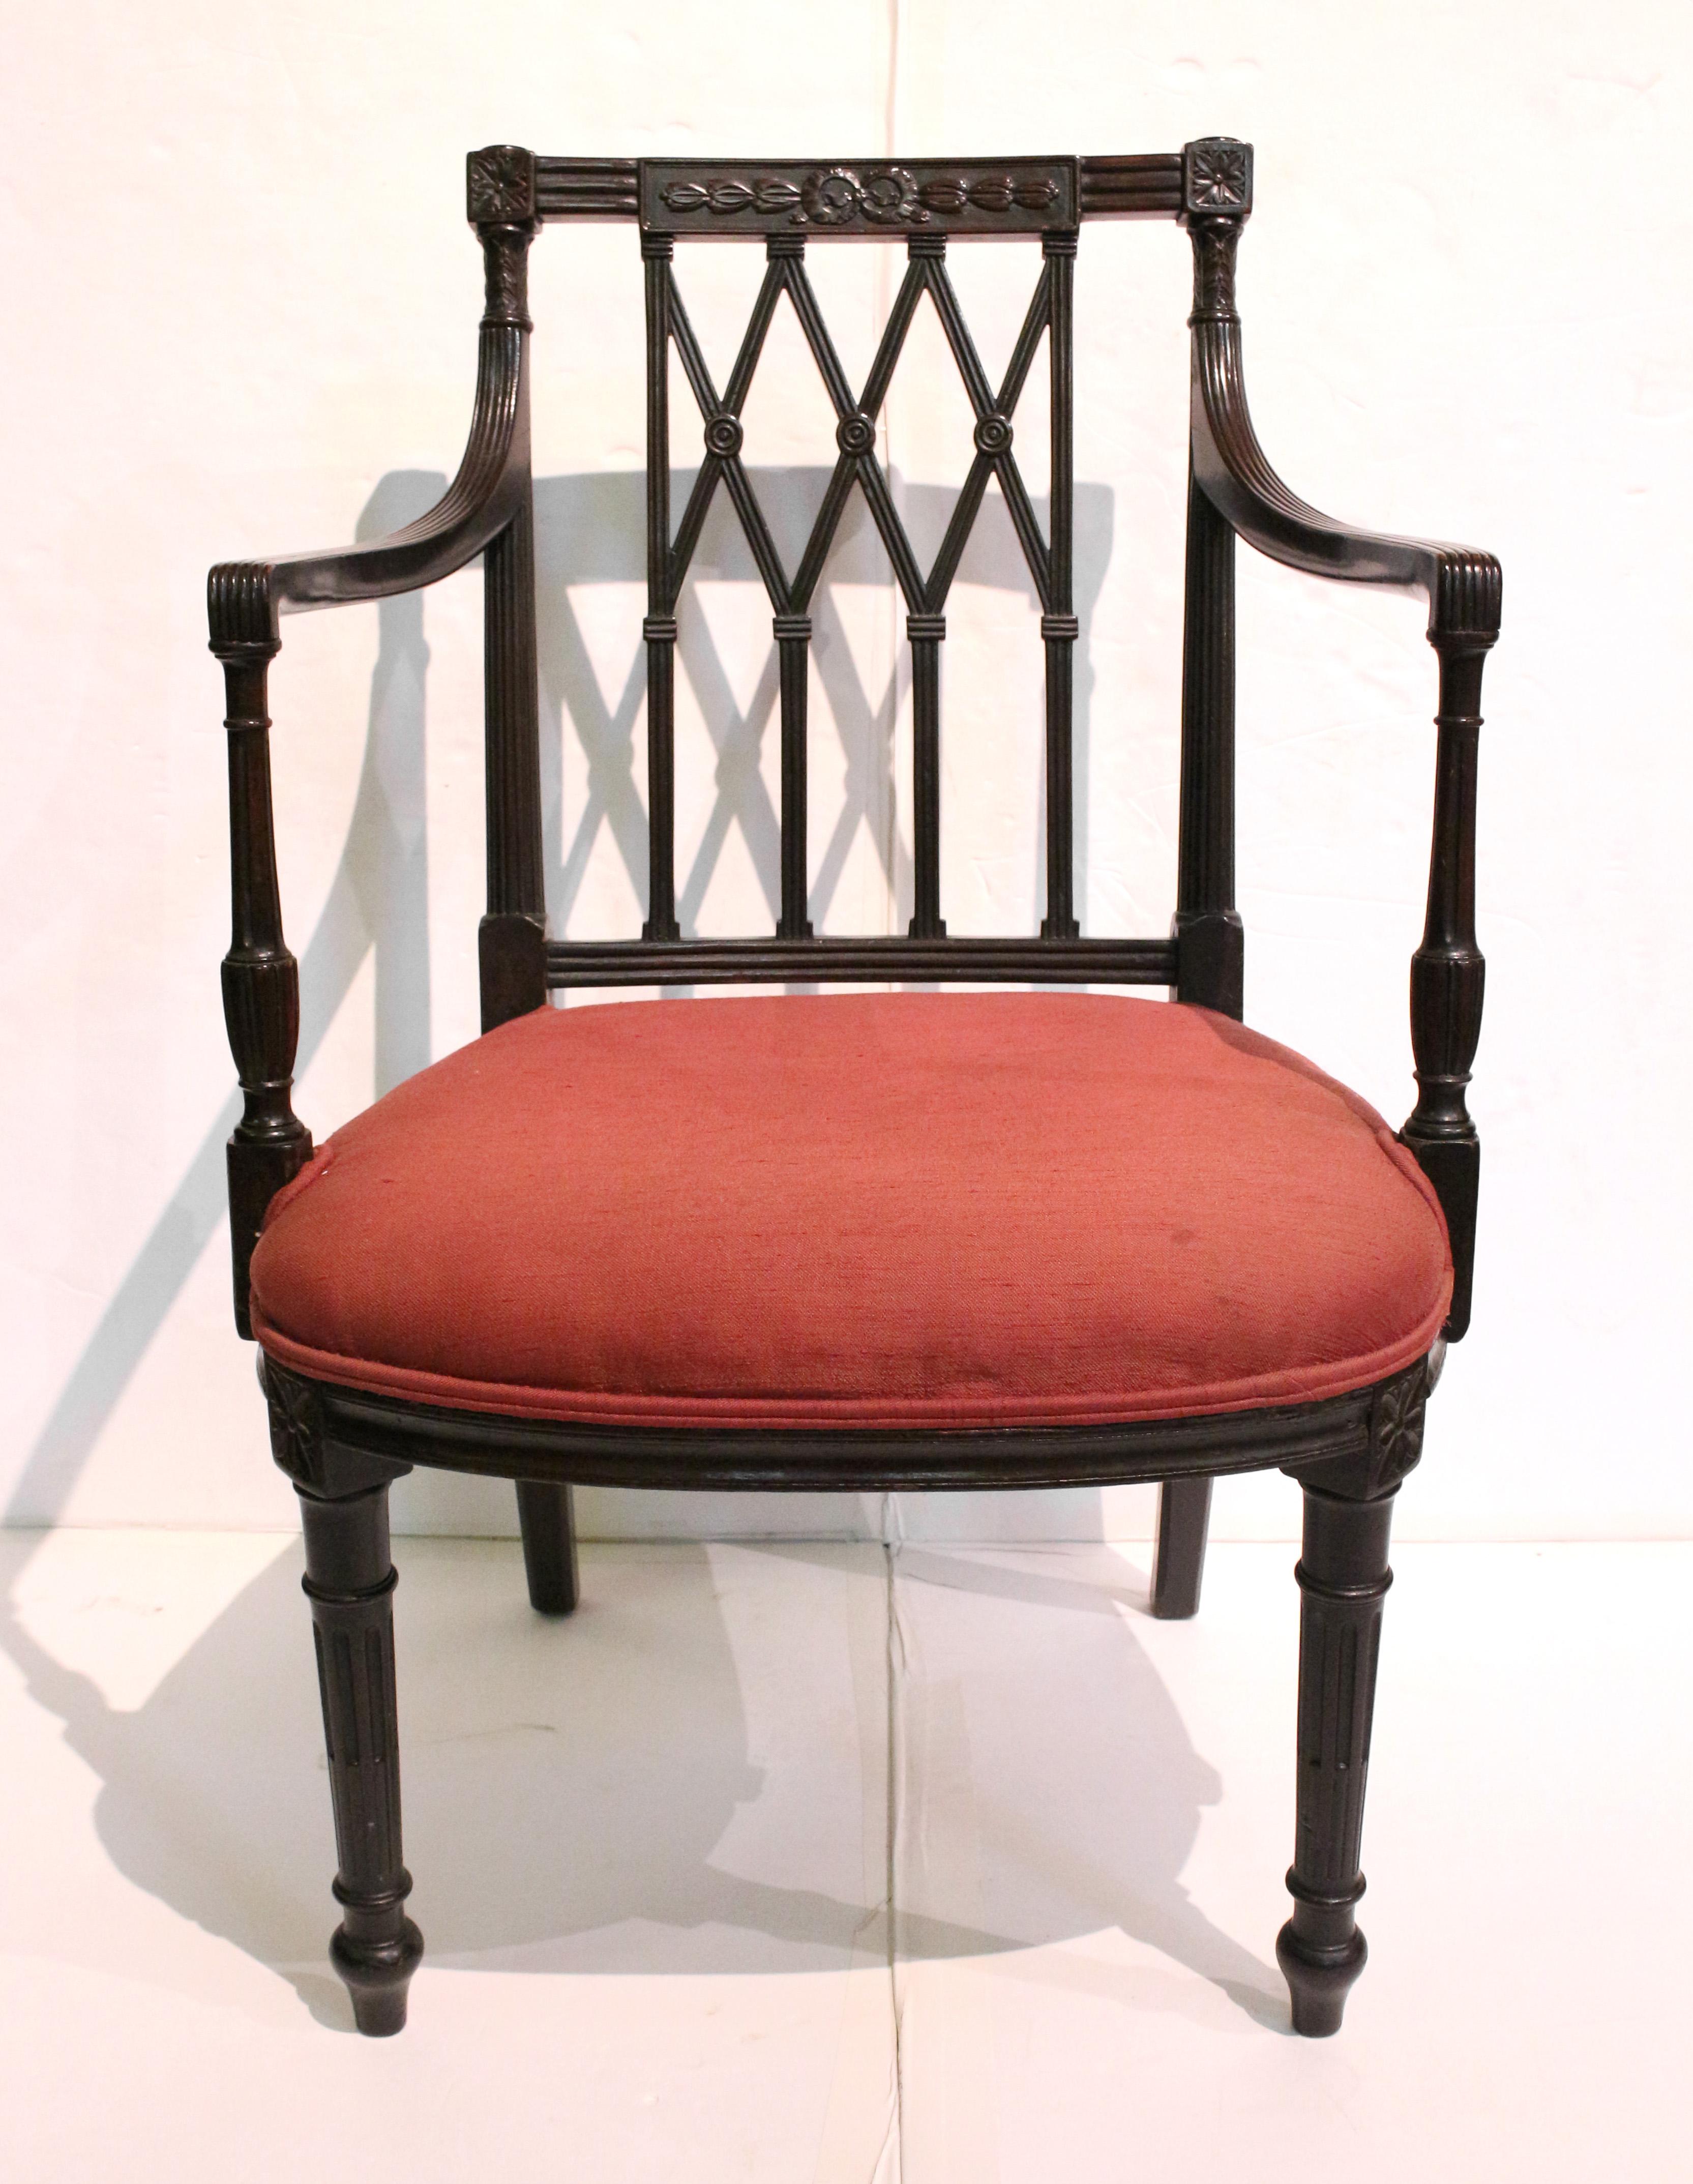 Pair of Mid-19th Century Classical English Arm Chairs 2